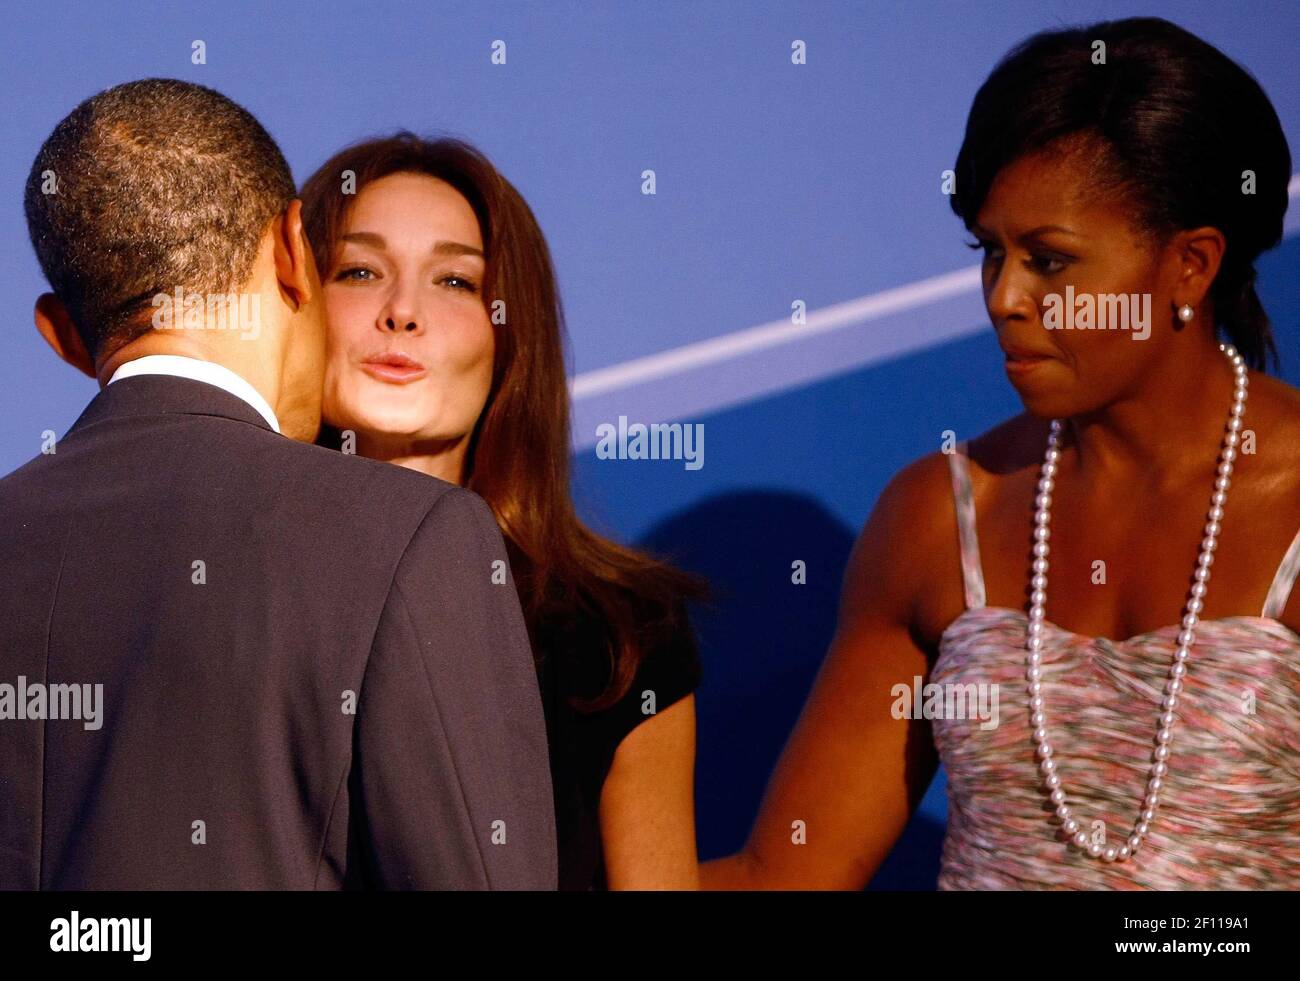 24 September 2009 - Pittsburgh, Pennsylvania - U.S. President Barack Obama (L) kisses French President Nicolas Sarkozy's wife Carla Bruni Sarkozy (C) while welcoming her to the opening dinner for G-20 leaders with U.S. first lady Michelle Obama at the Phipps Conservatory on September 24, 2009 in Pittsburgh, Pennsylvania. Heads of state from the world's leading economic powers arrived today for the two-day G-20 summit held at the David L. Lawrence Convention Center aimed at promoting economic growth. Photo Credit: Win McNamee/Pool/Sipa Press/0909251406 Stock Photo